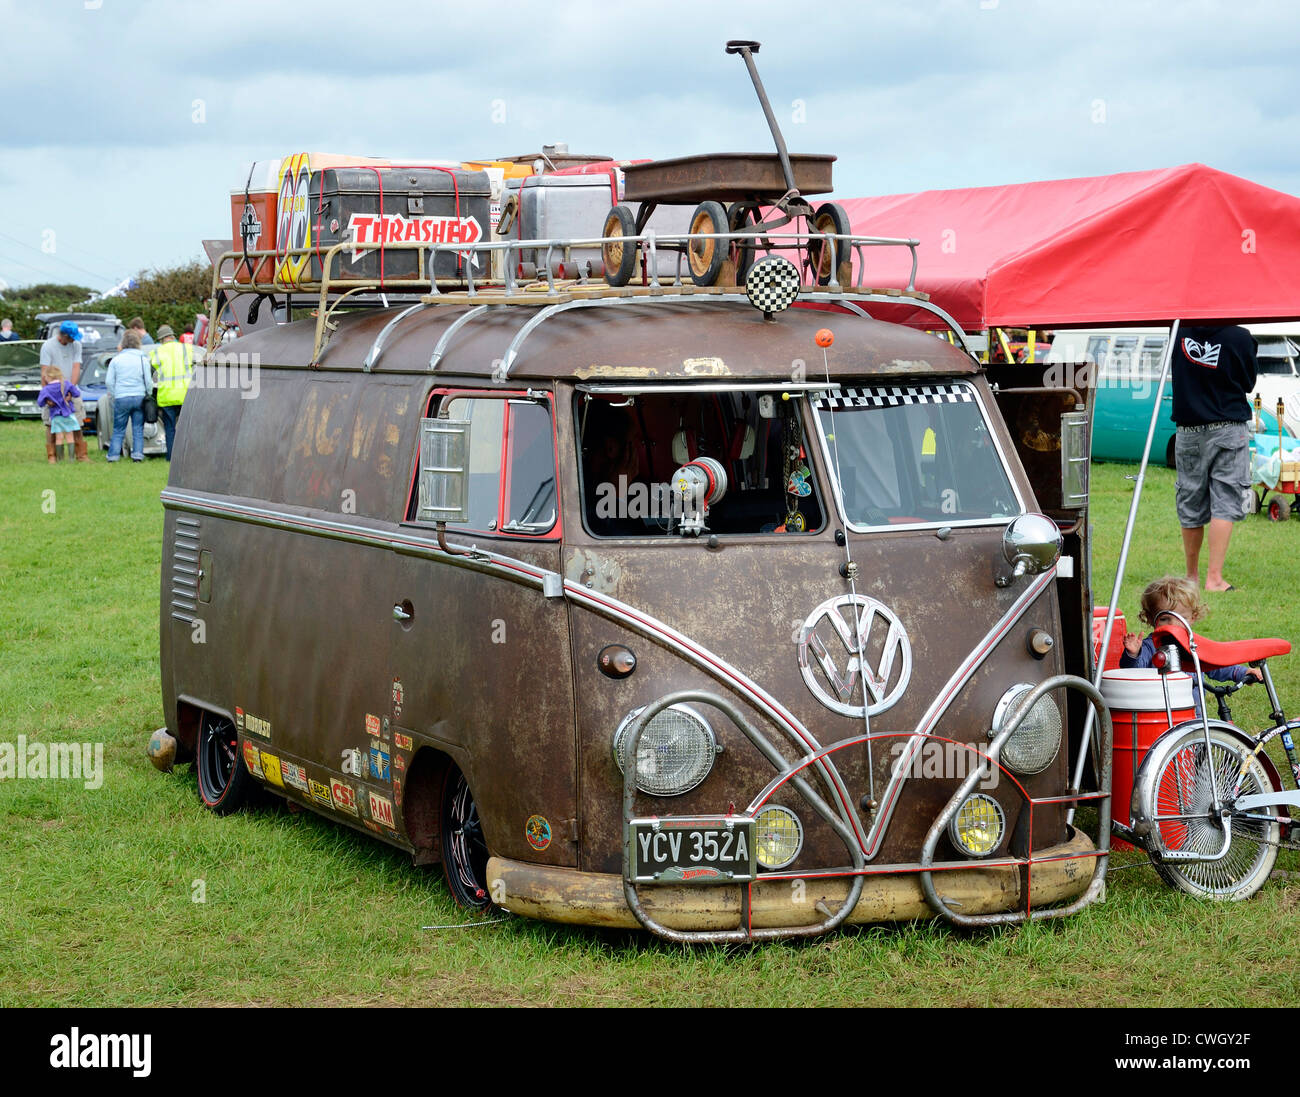 A VW camper van at a Volkswagen rally in Cornwall, UK Stock Photo